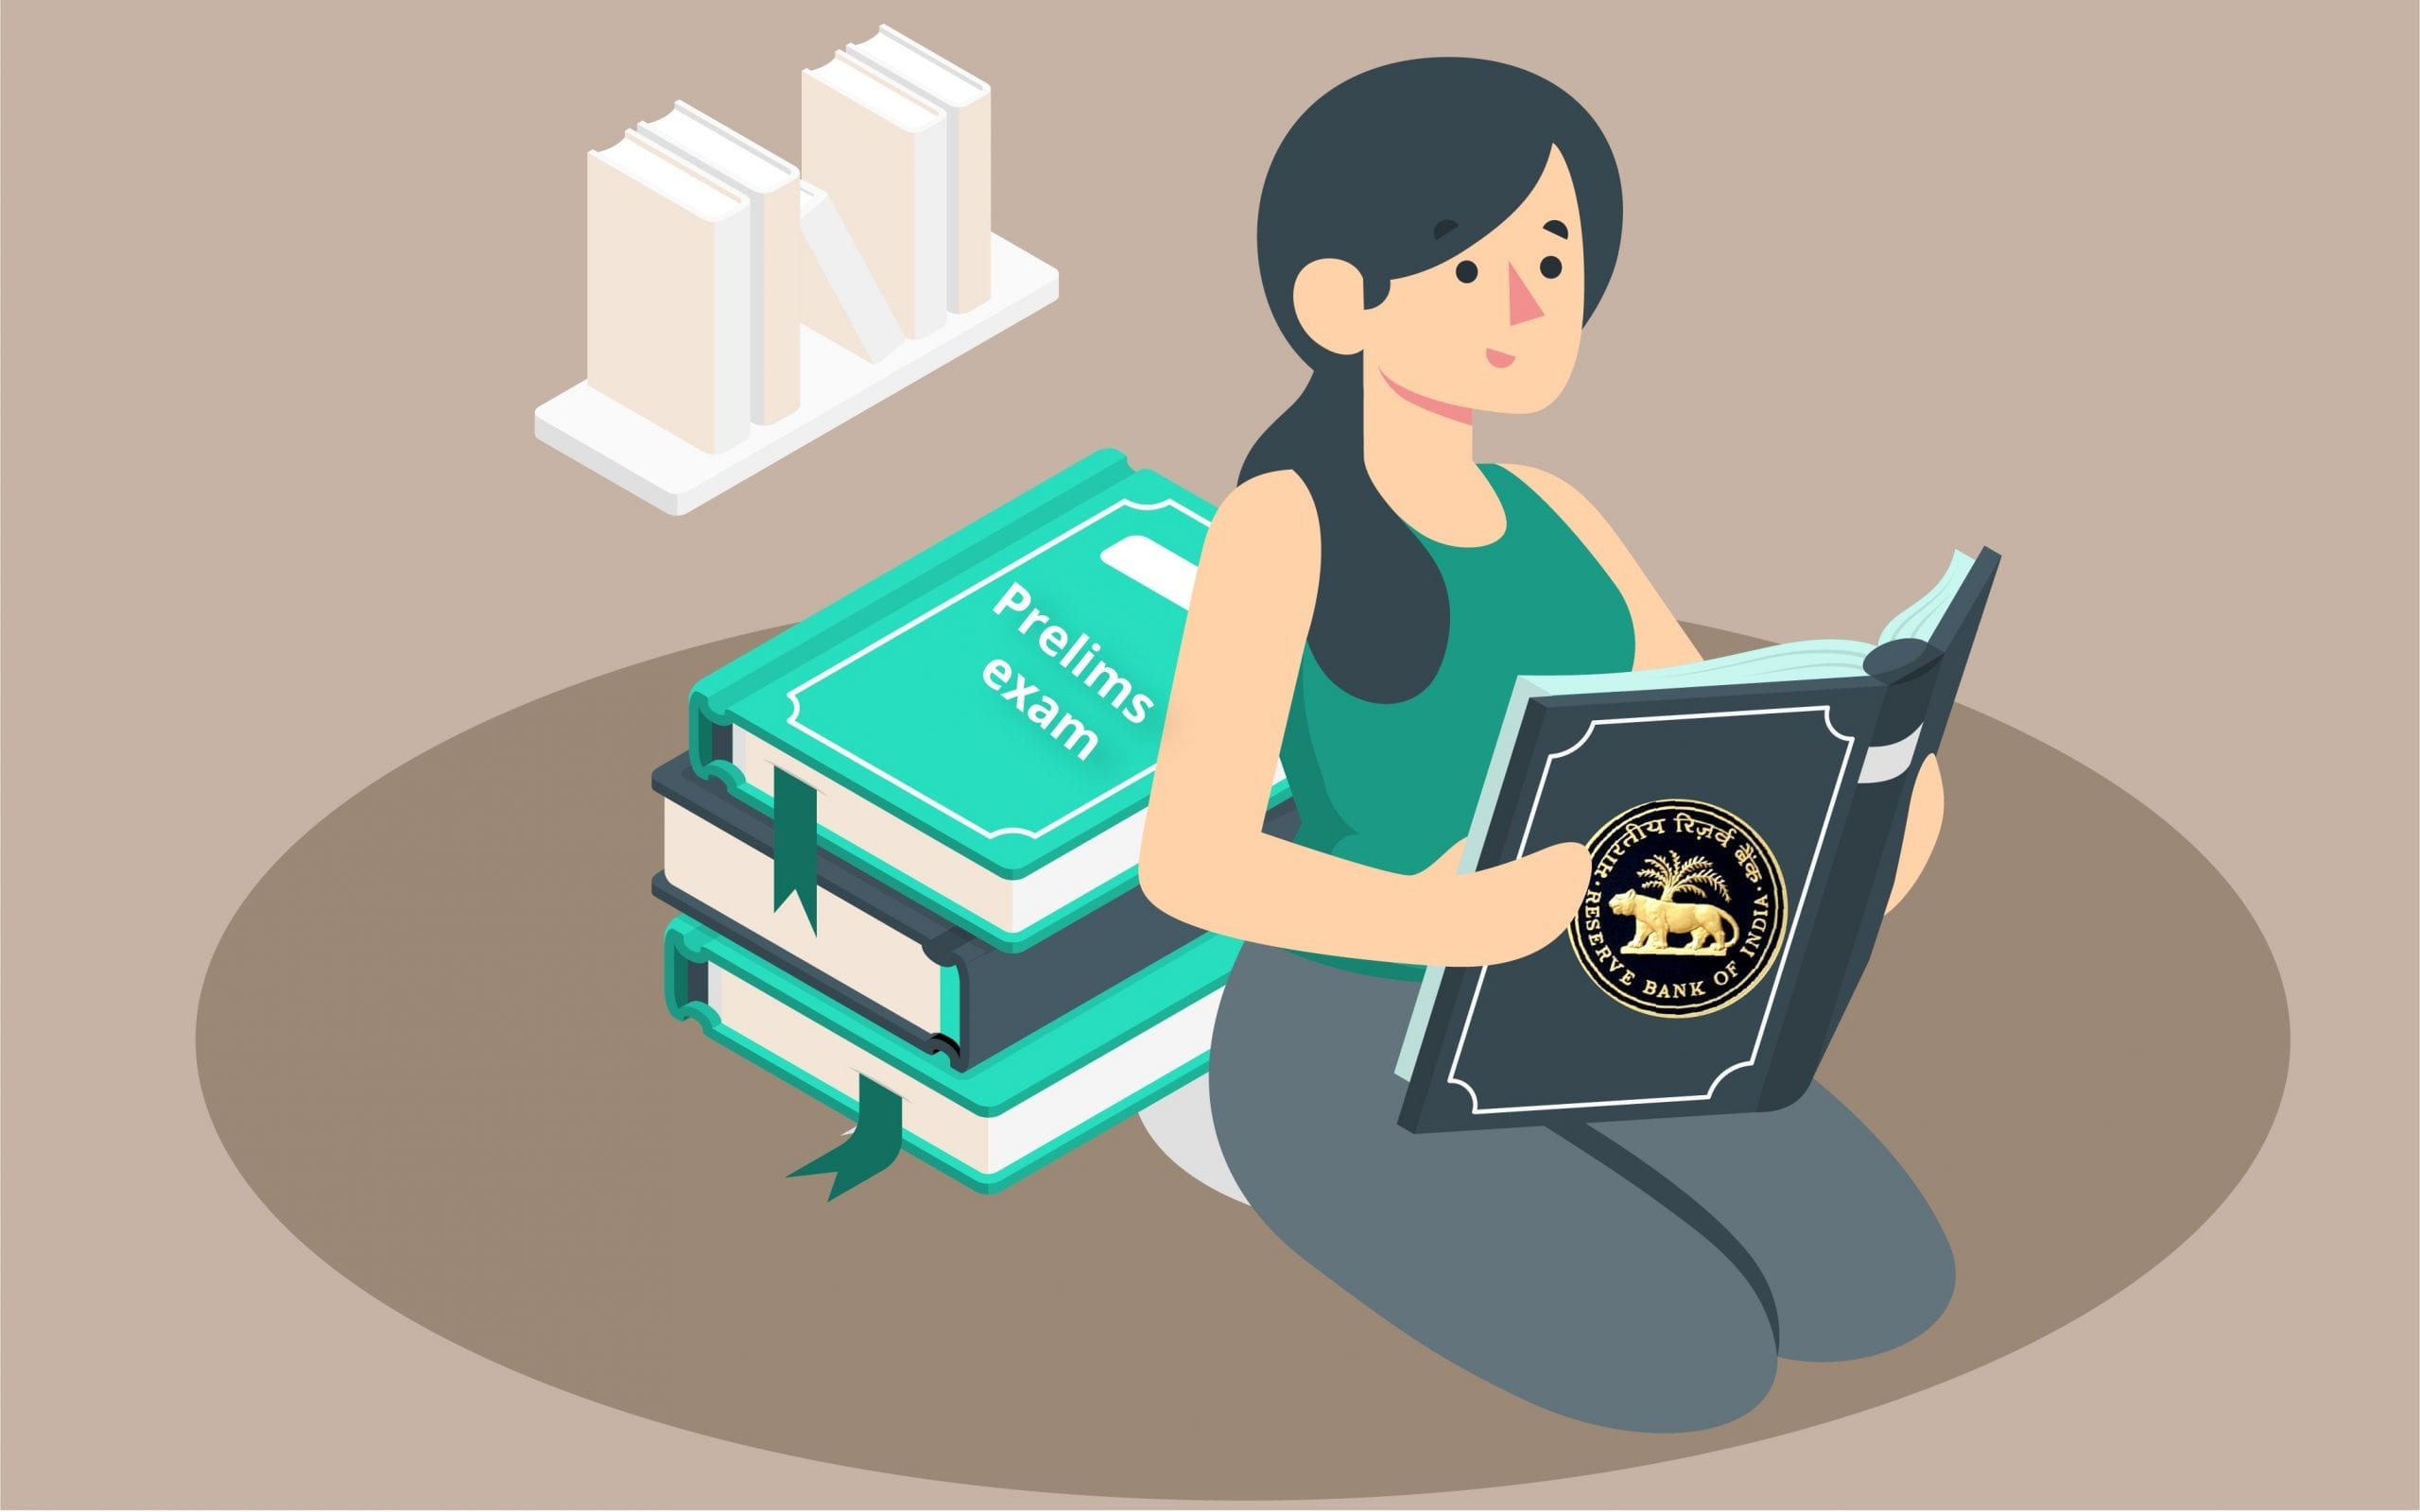 RBI Assistant Exam: How to Prepare in 30 Days?